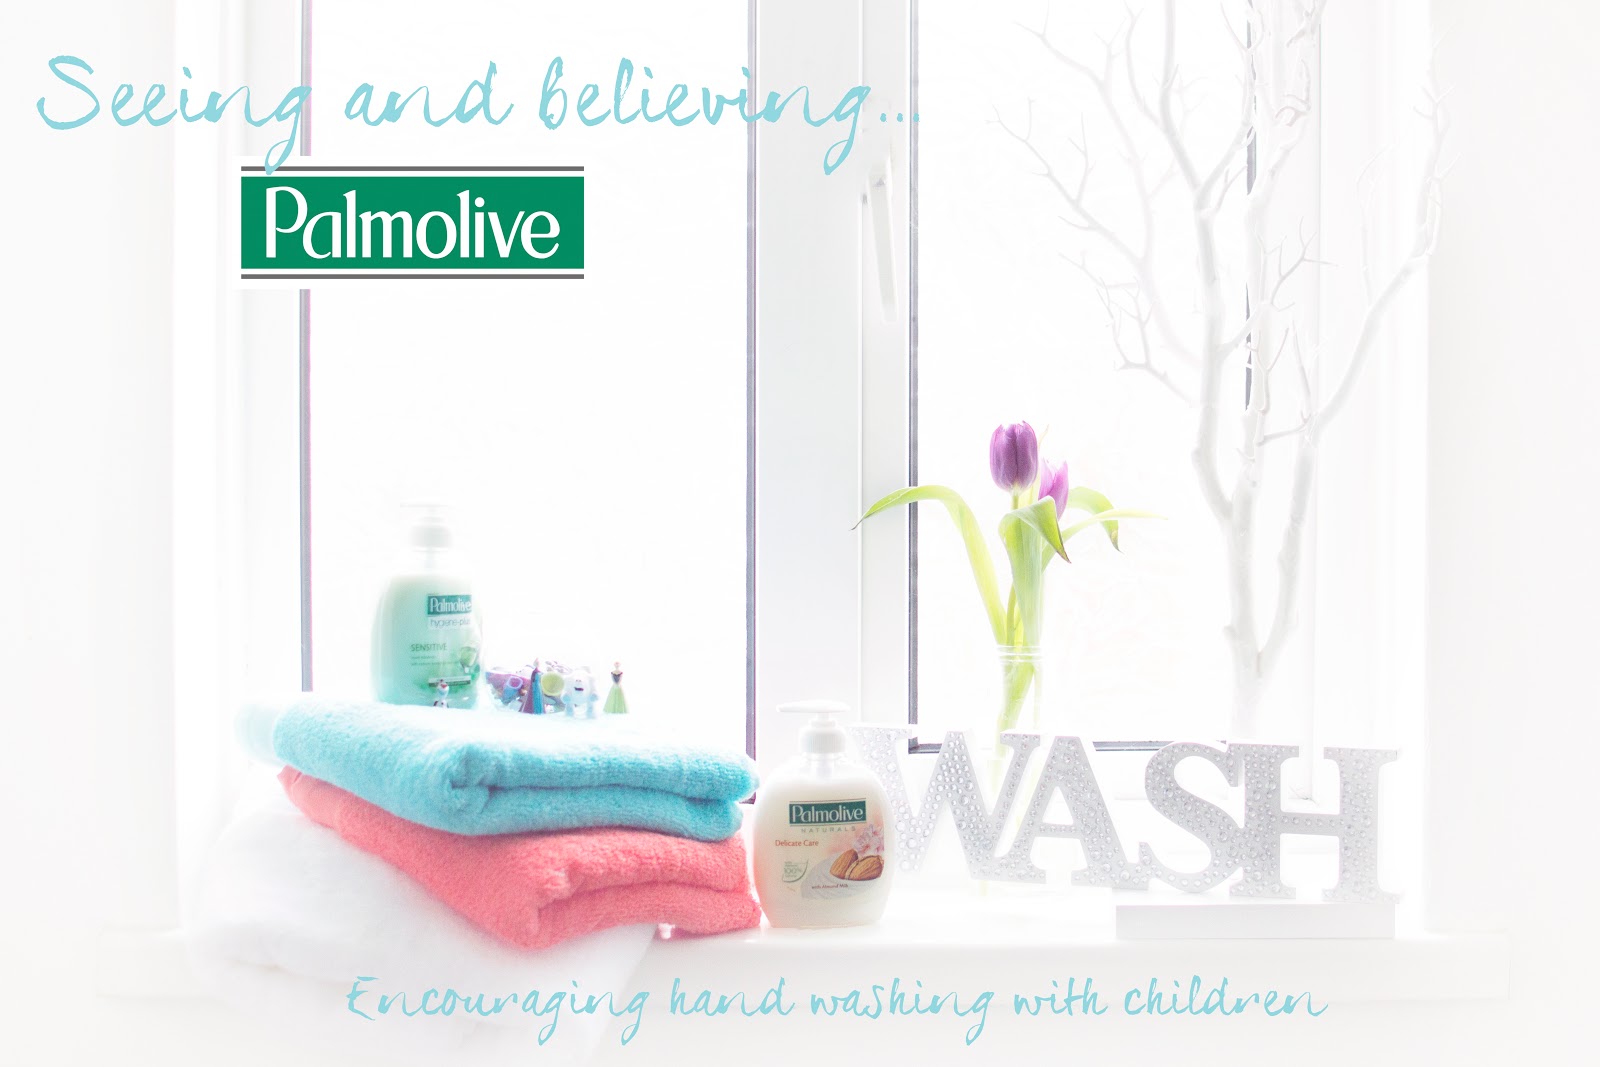 SEEING & BELIEVING – HOW TO ENCOURAGE HAND WASHING WITH CHILDREN